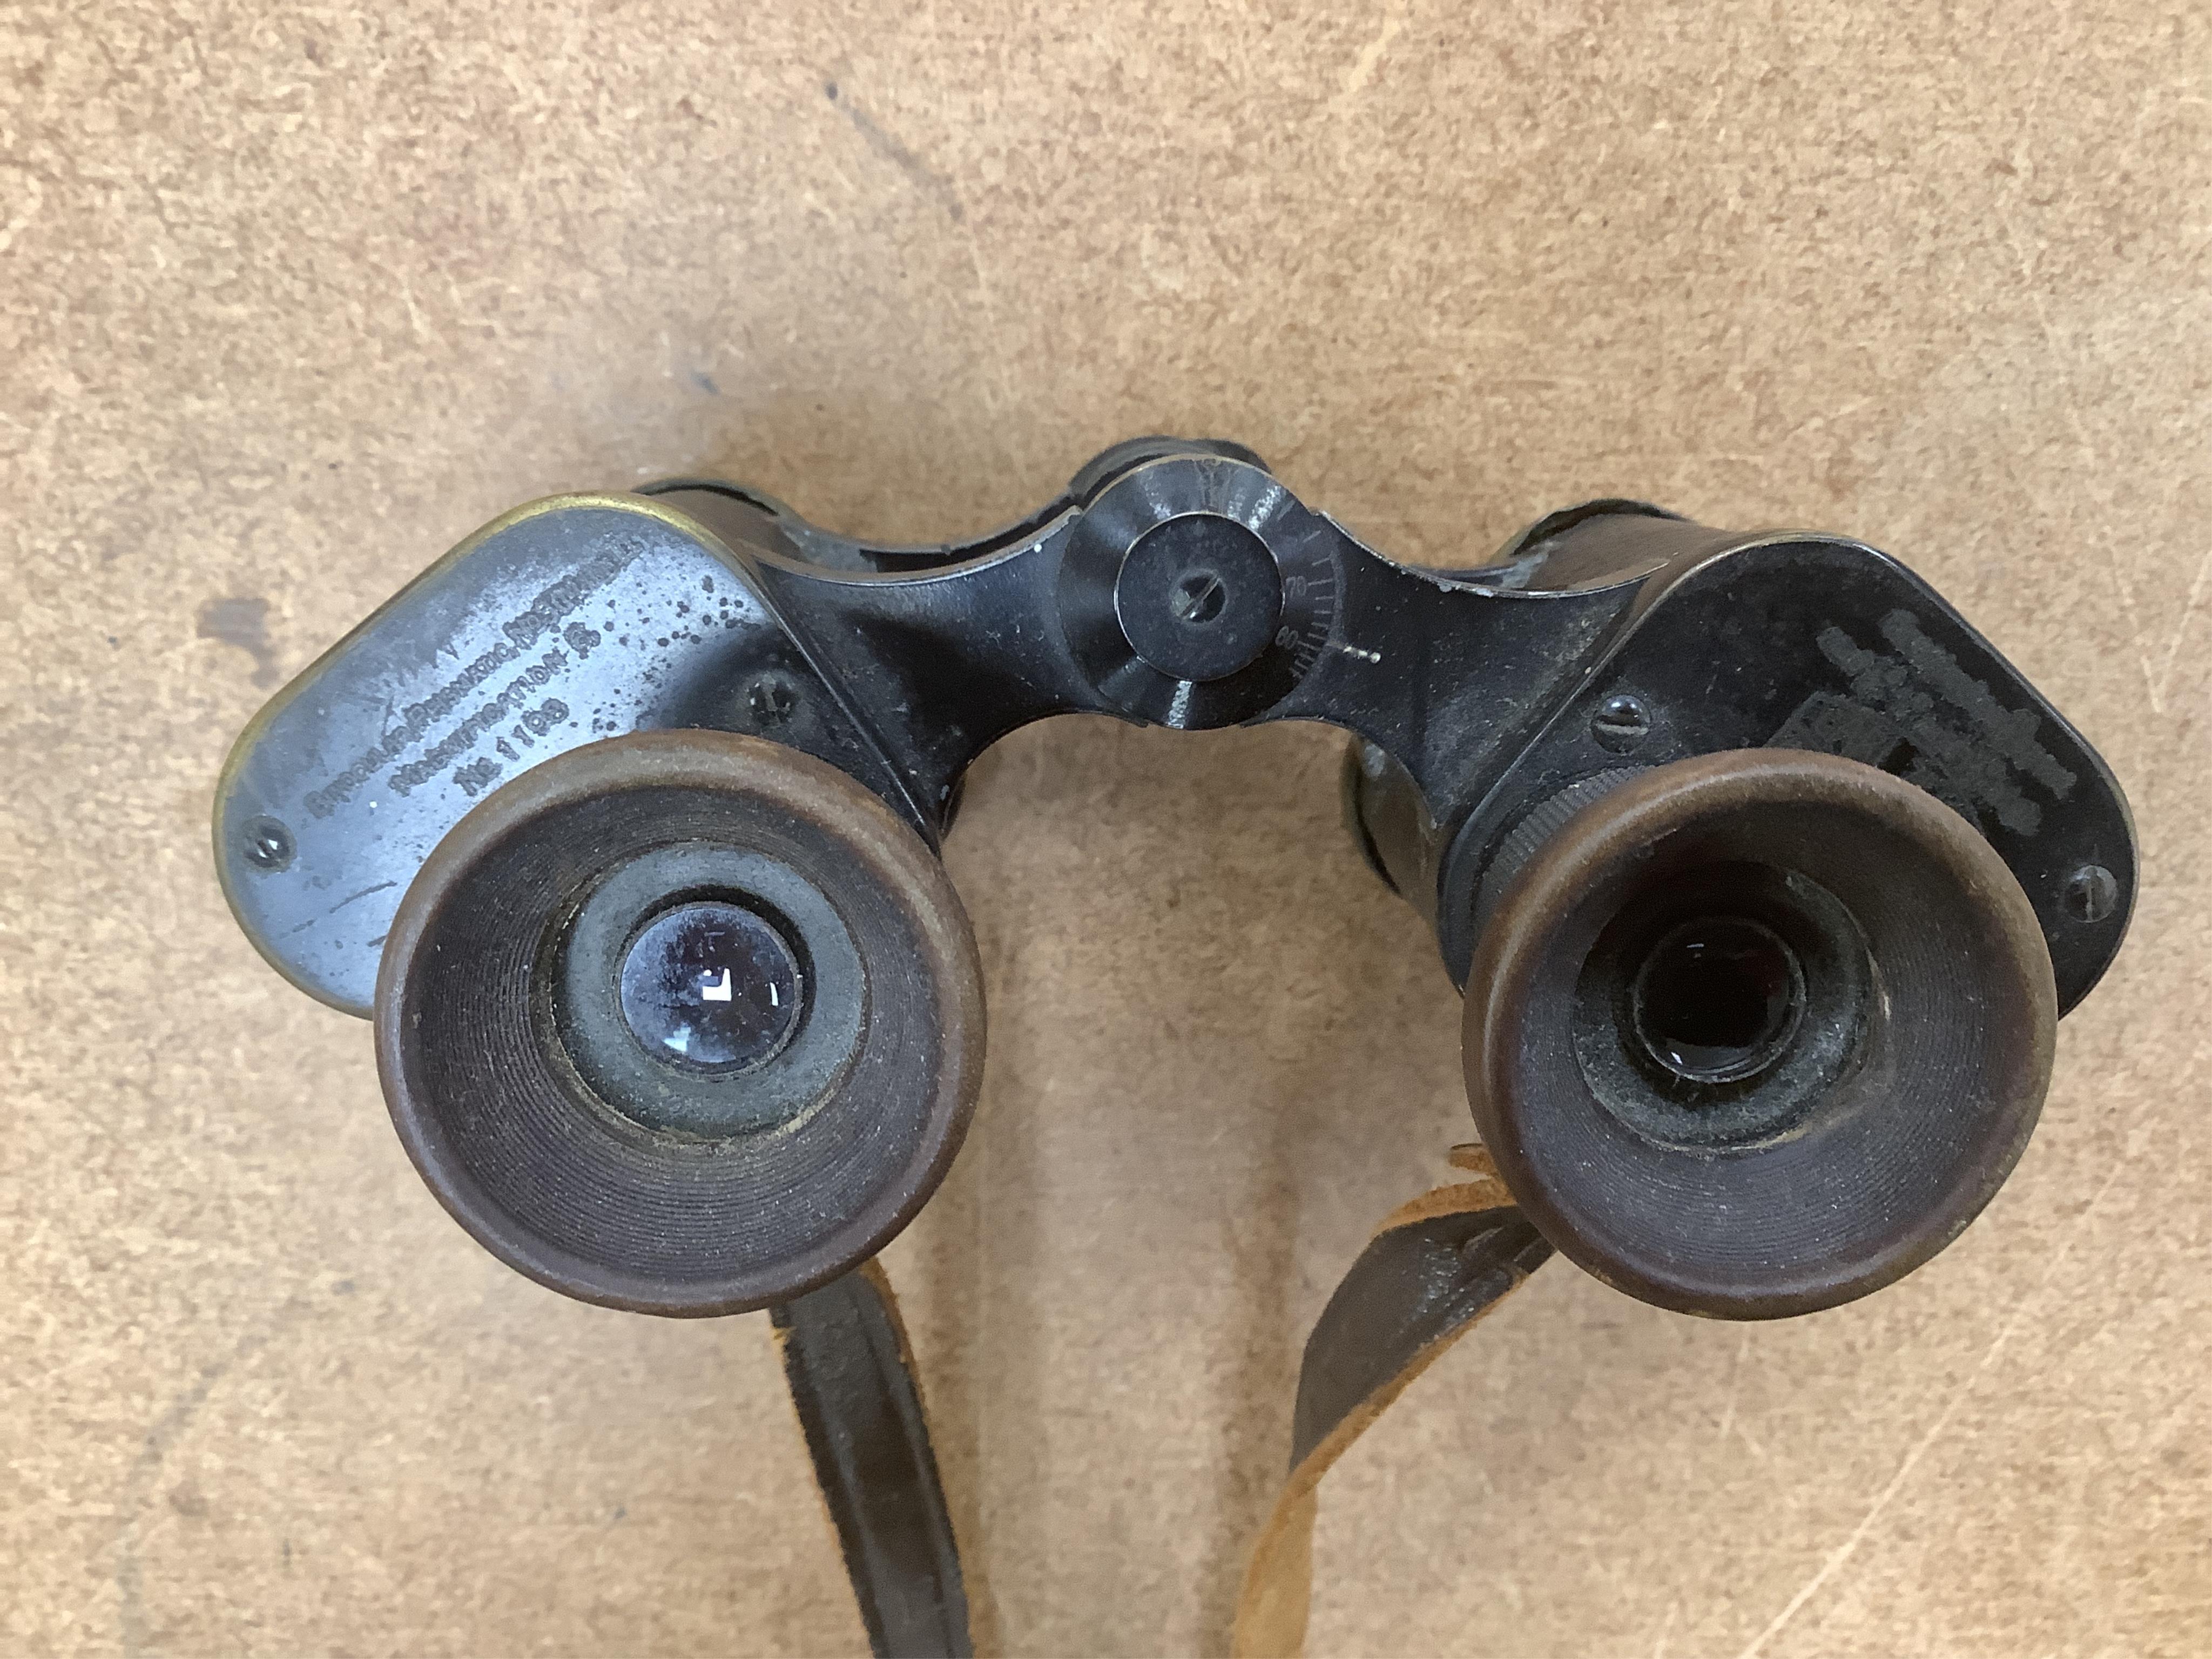 A pair of early Ross binoculars and one other pair of binoculars. Condition - fair